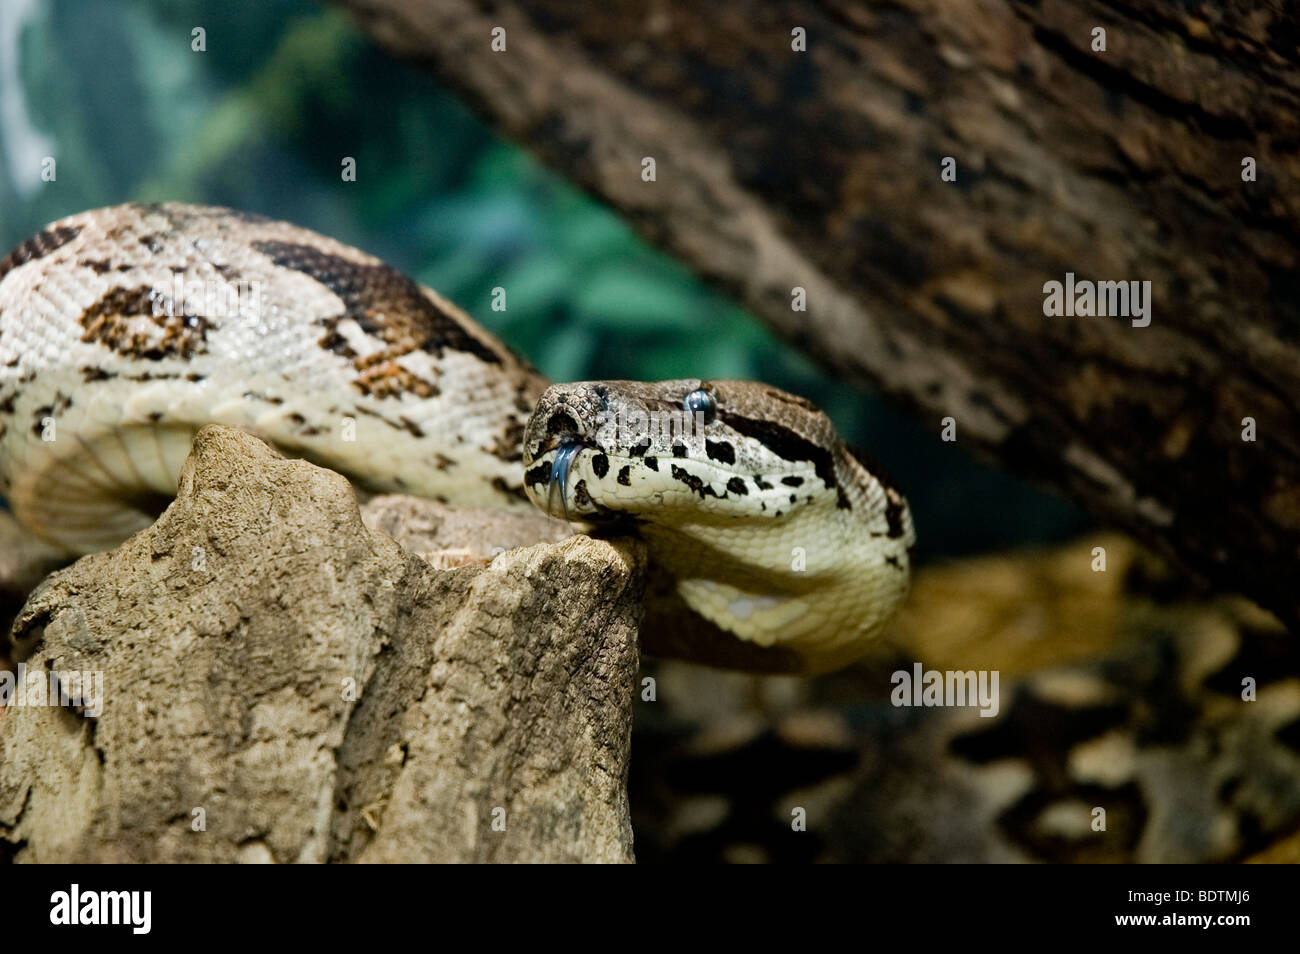 A boa constrictor with tongue out rests on a log Stock Photo